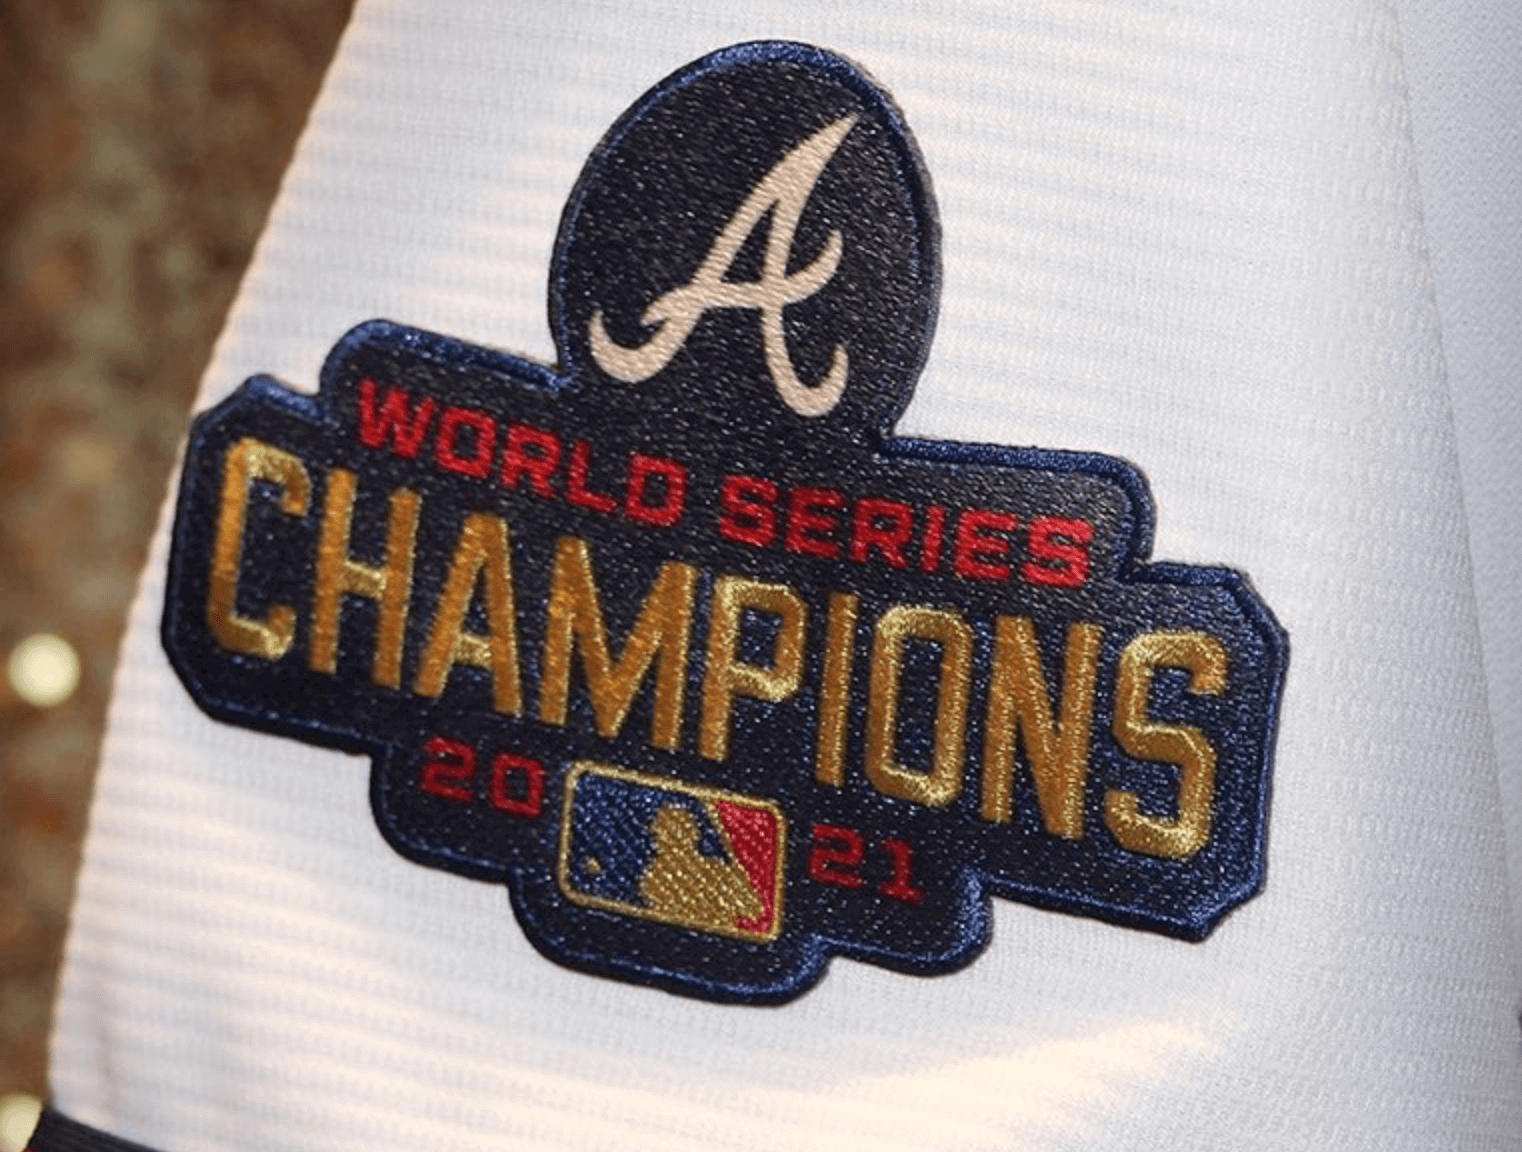 Take a look at the Braves gold trimmed World Series gear